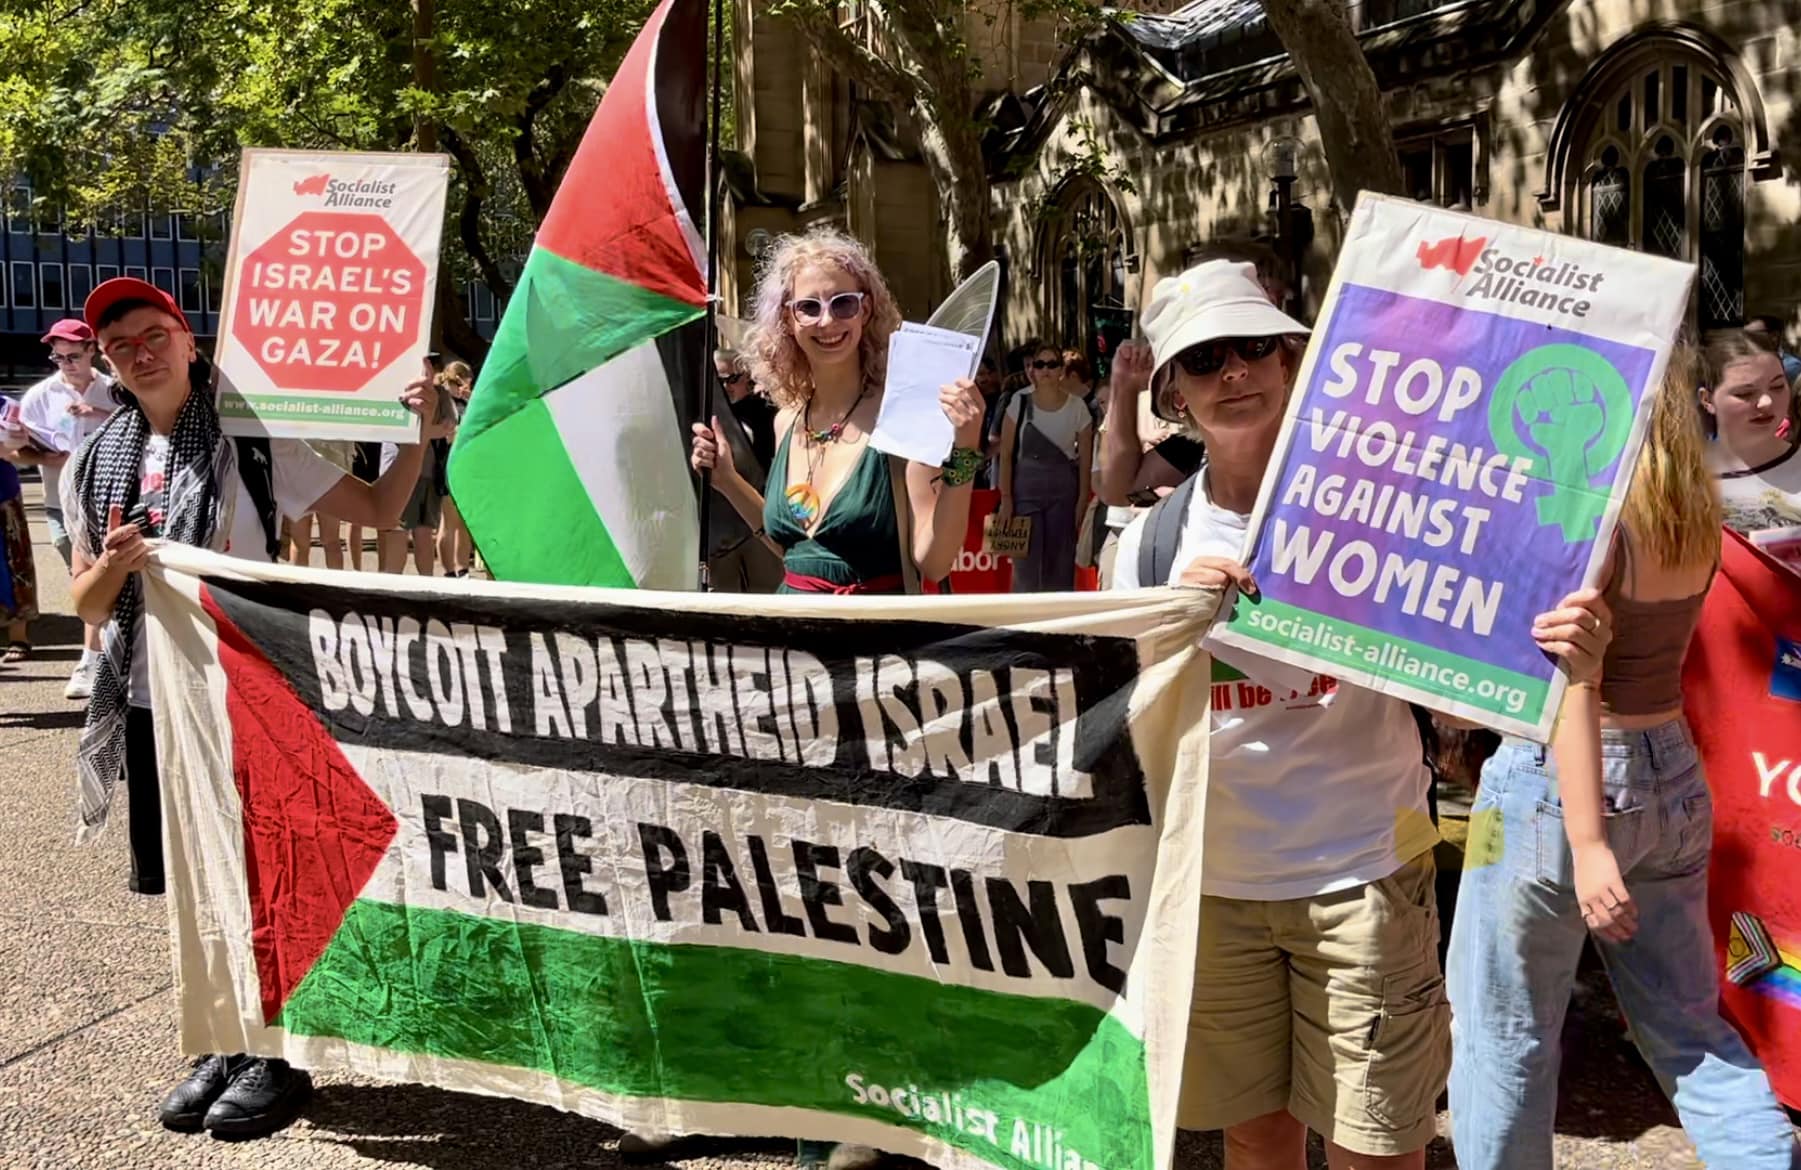 Palestinian solidarity at the International Women's Day march in Gadigal/Sydney. Photo: Peter Boyle